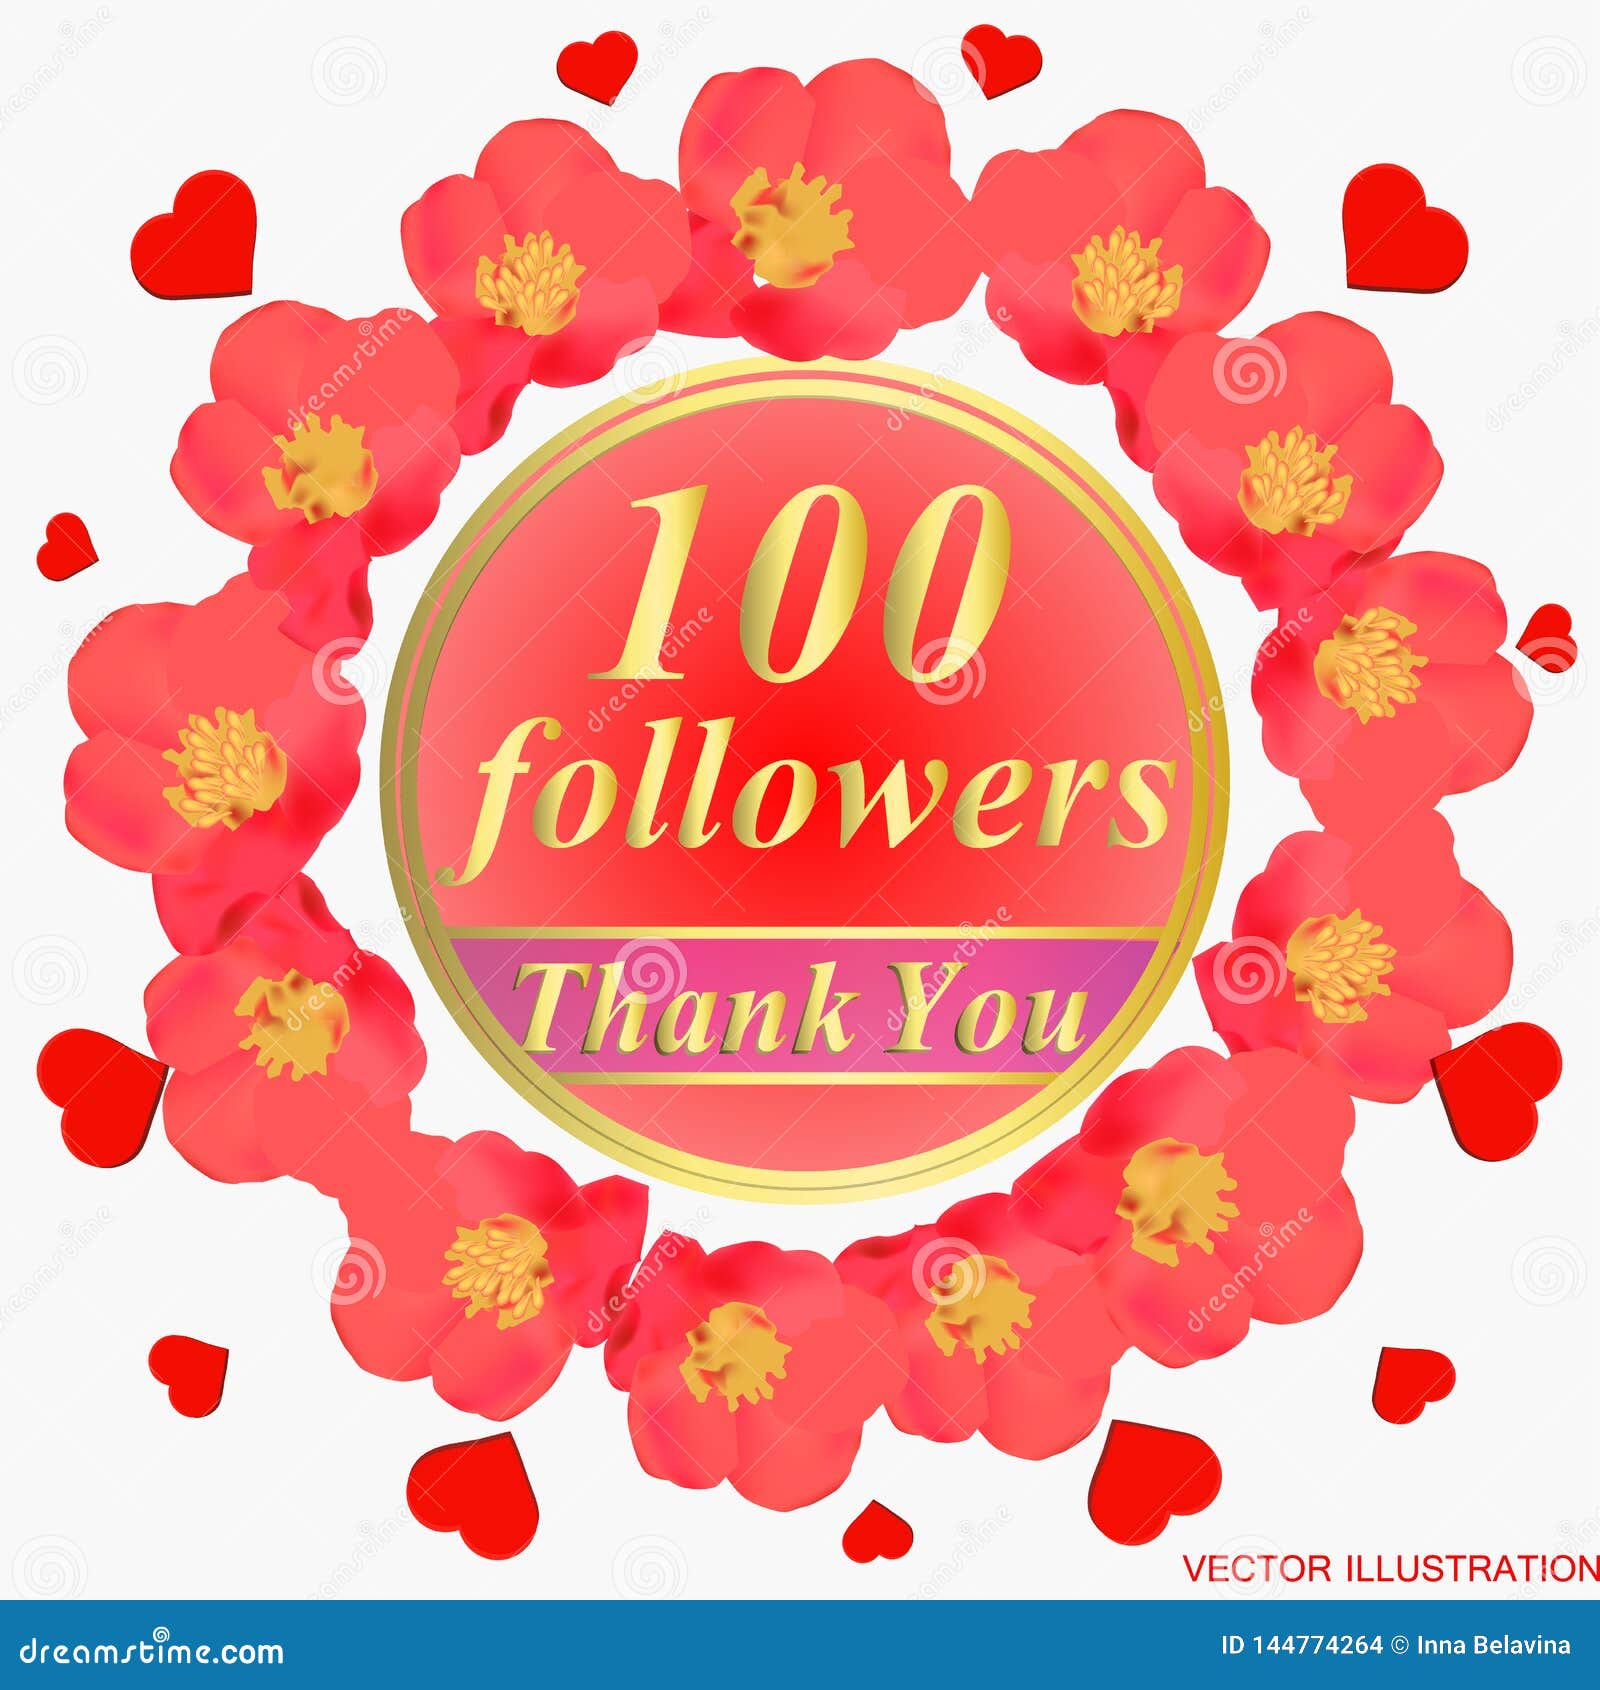 100 followers illustration with thank you on a ribbon. 